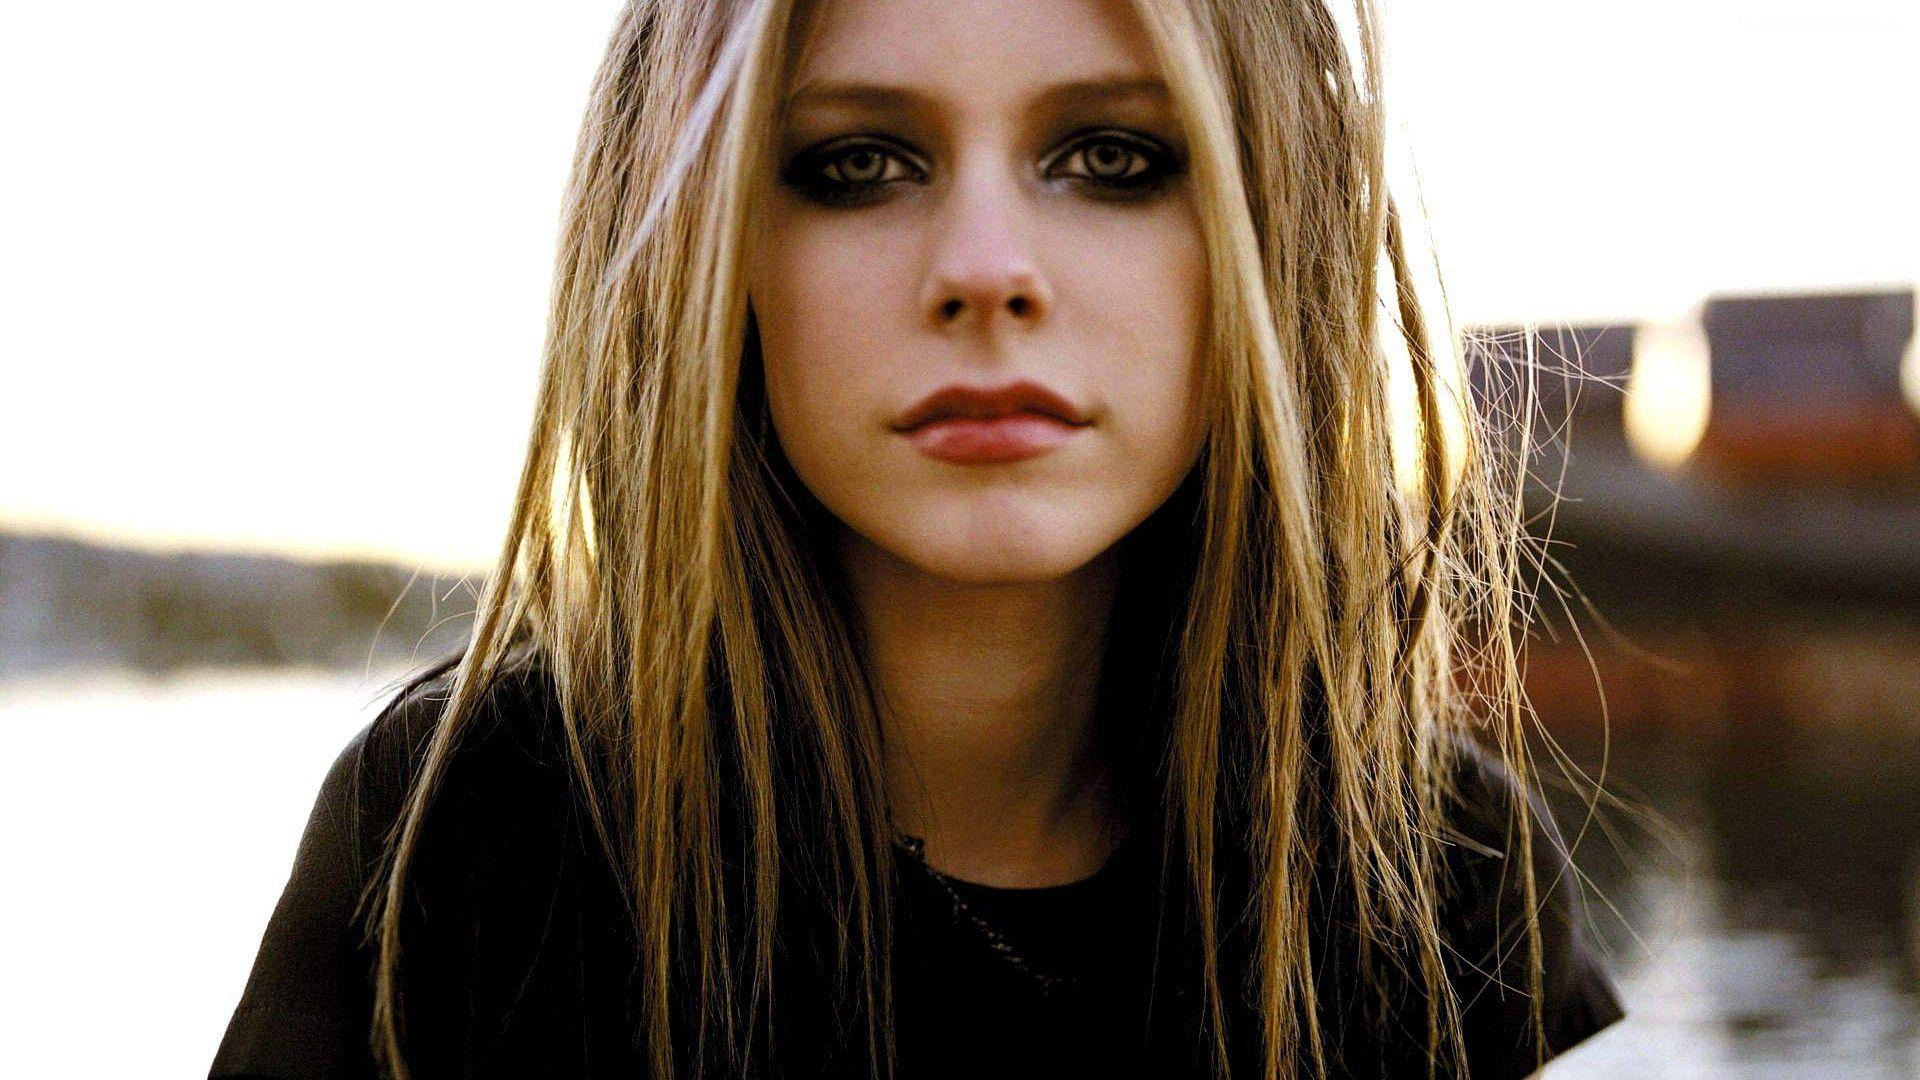 Avril Lavigne Wallpapers Top Free Avril Lavigne Backgrounds Wallpaperaccess